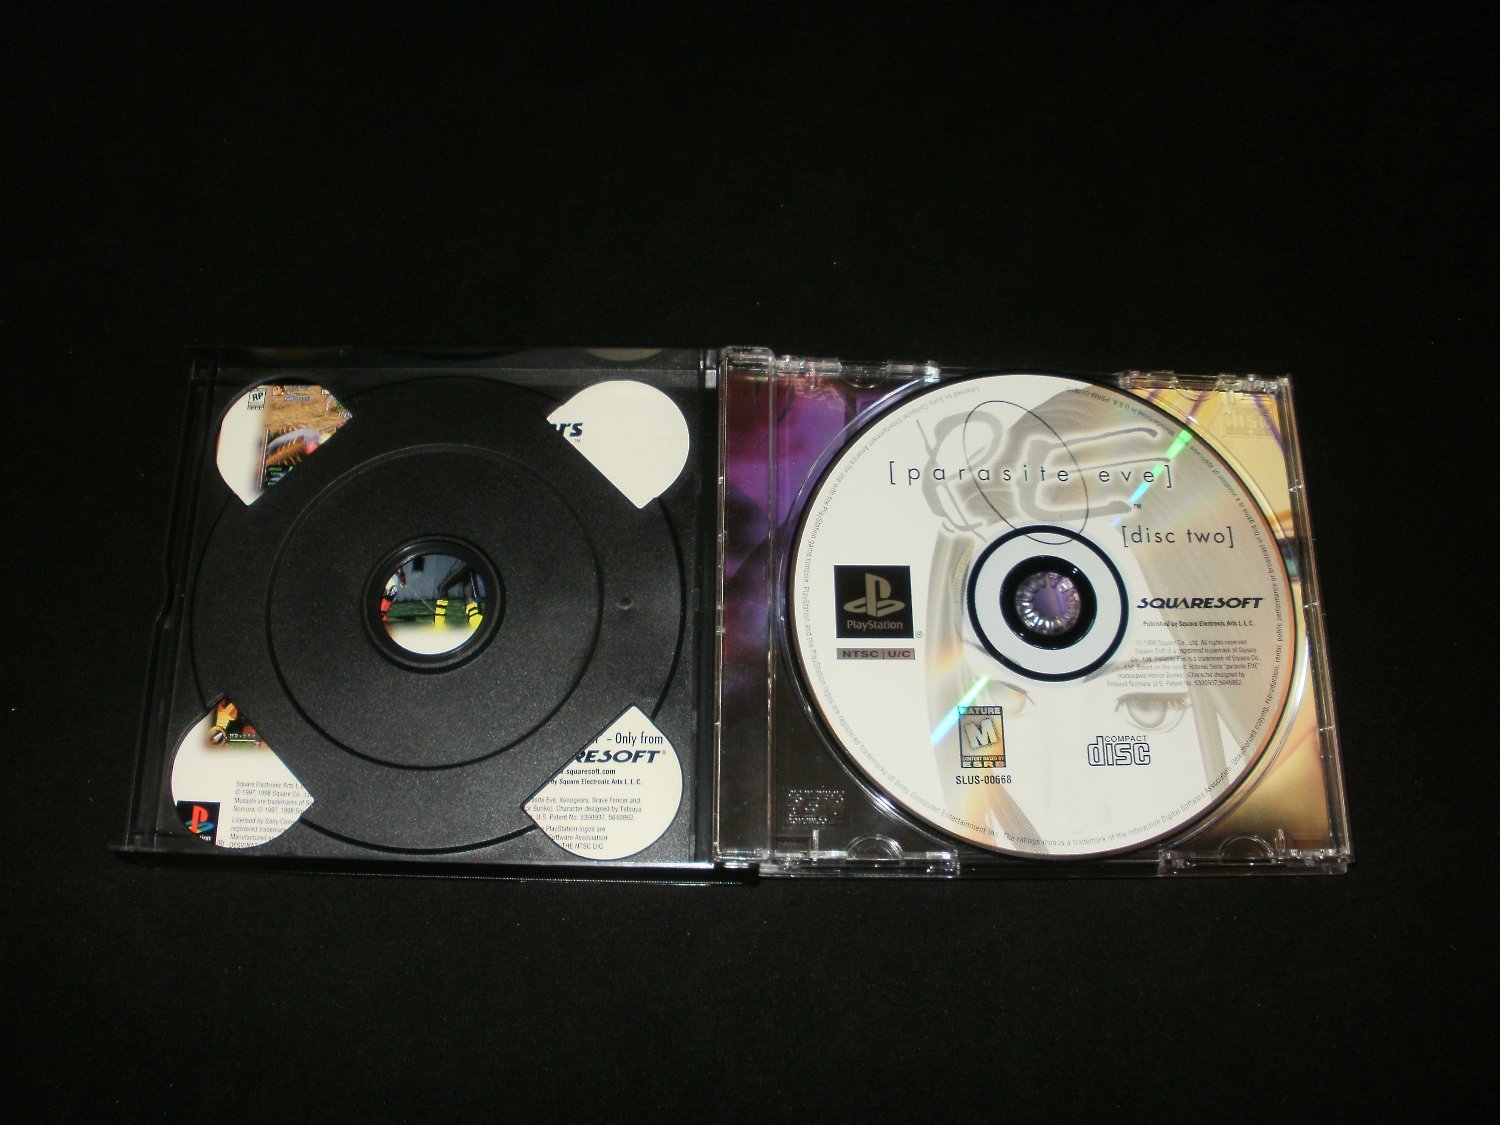 parasite eve ps1 disc cost